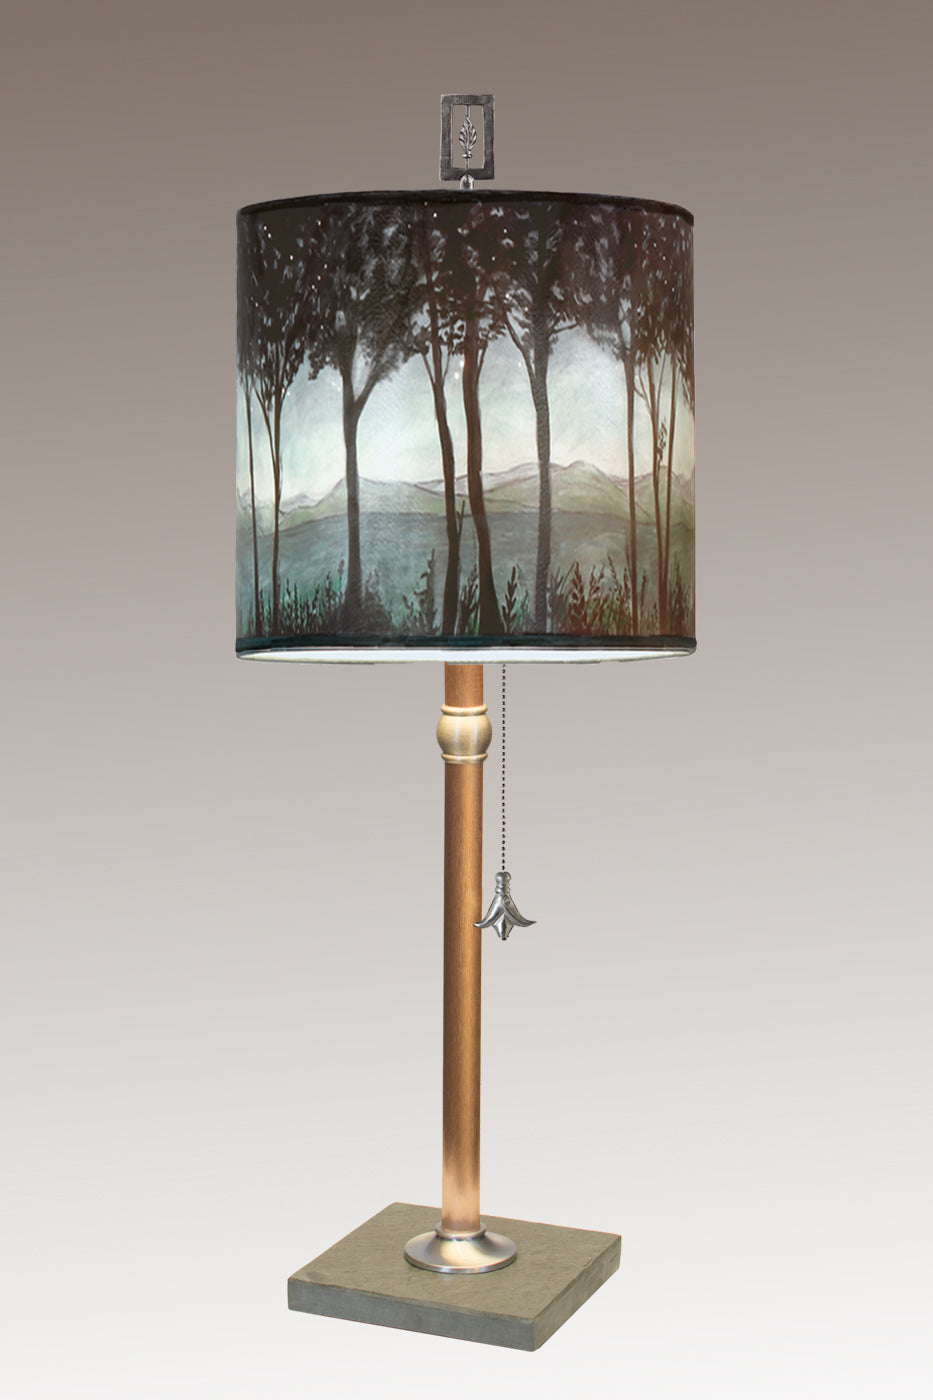 Janna Ugone & Co Table Lamps Copper Table Lamp with Medium Drum Shade in Twilight